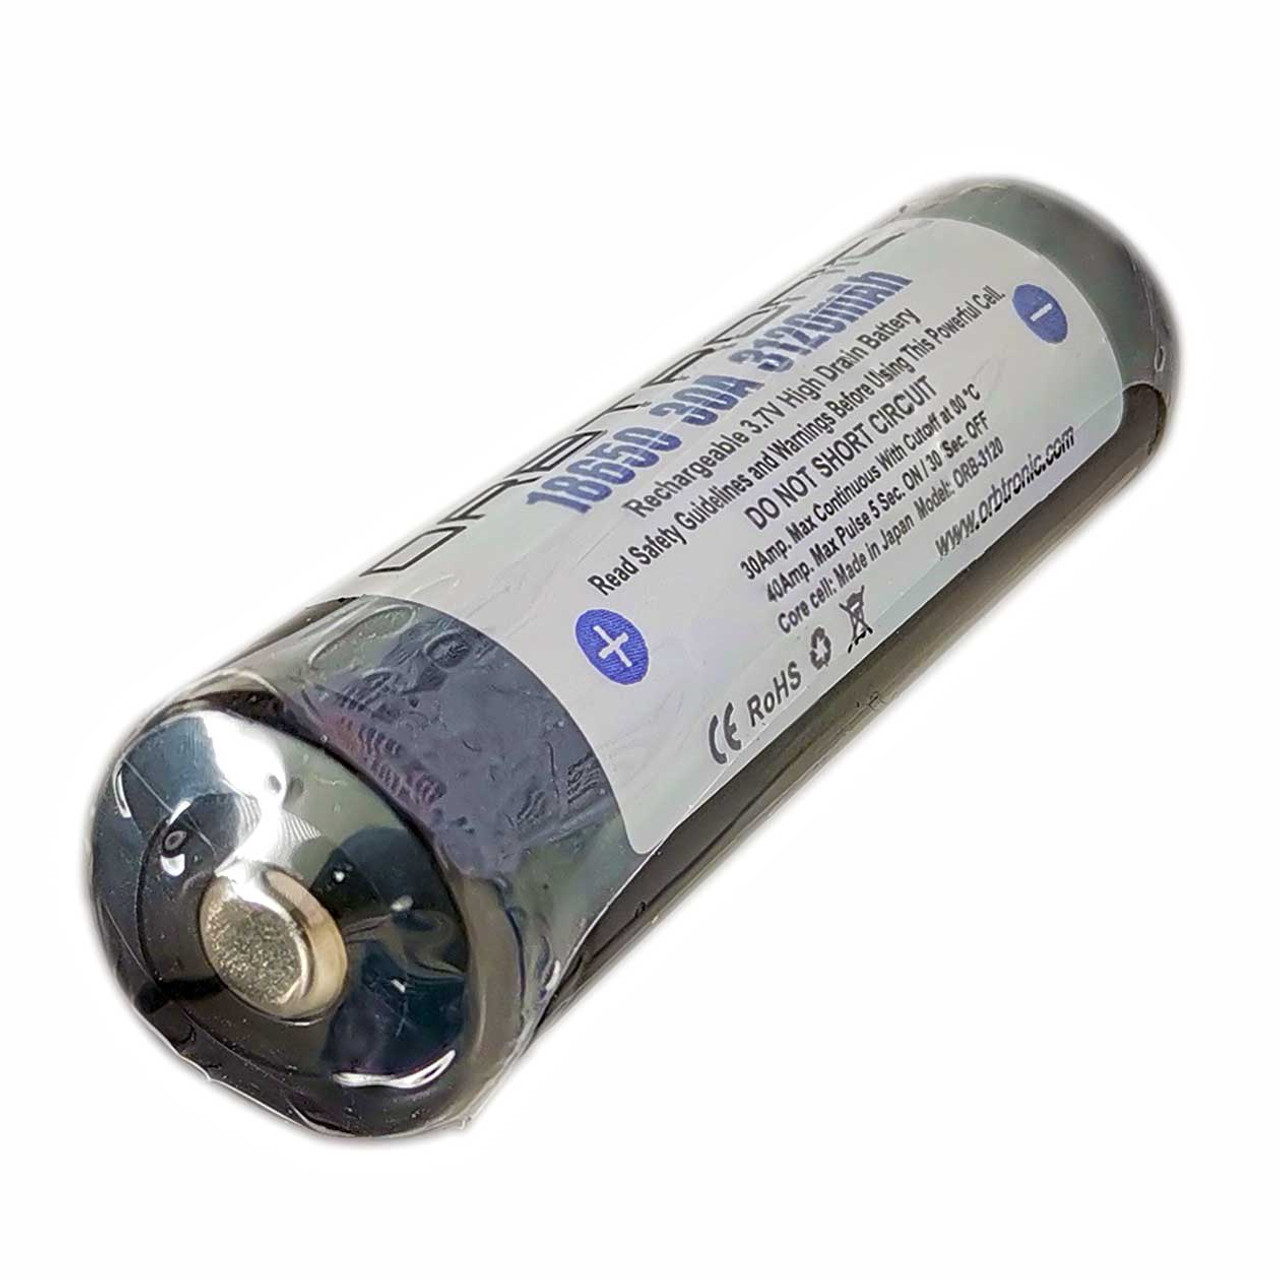 Orbtronic 18650 3120mAh Button Top (Rechargeable) Li-ion IMR Battery